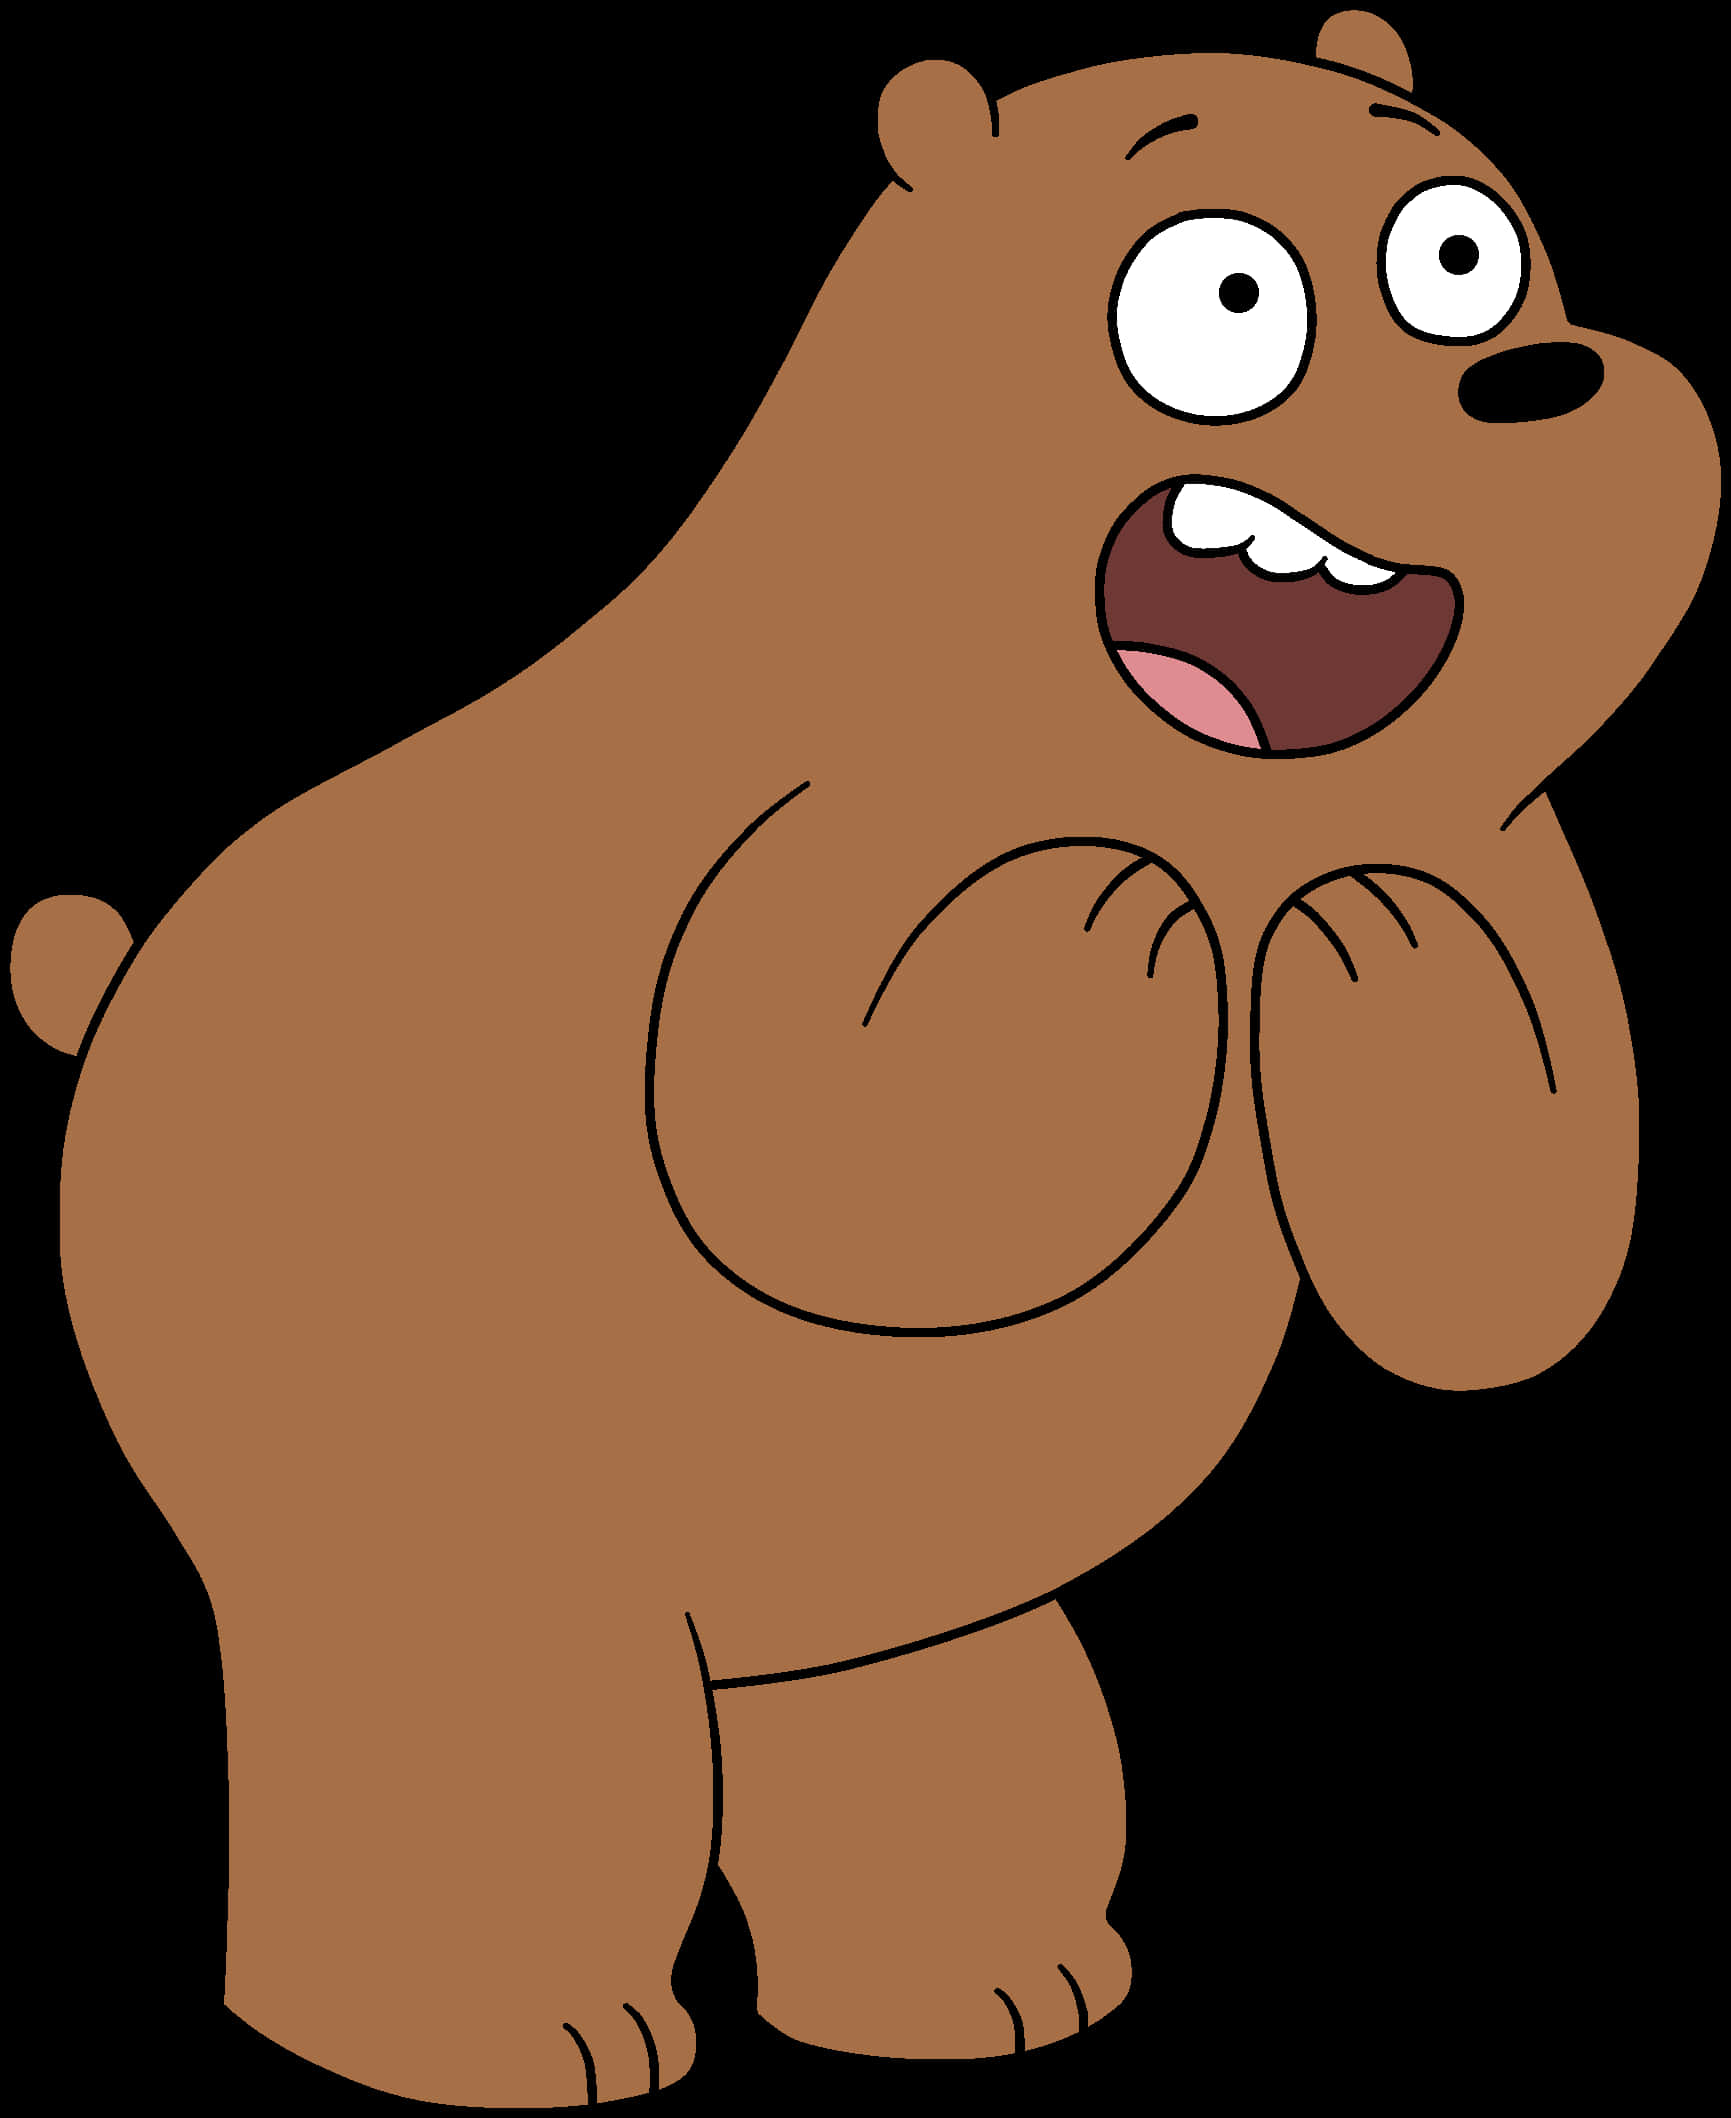 Cartoon Bear With Hands On Its Hind Legs